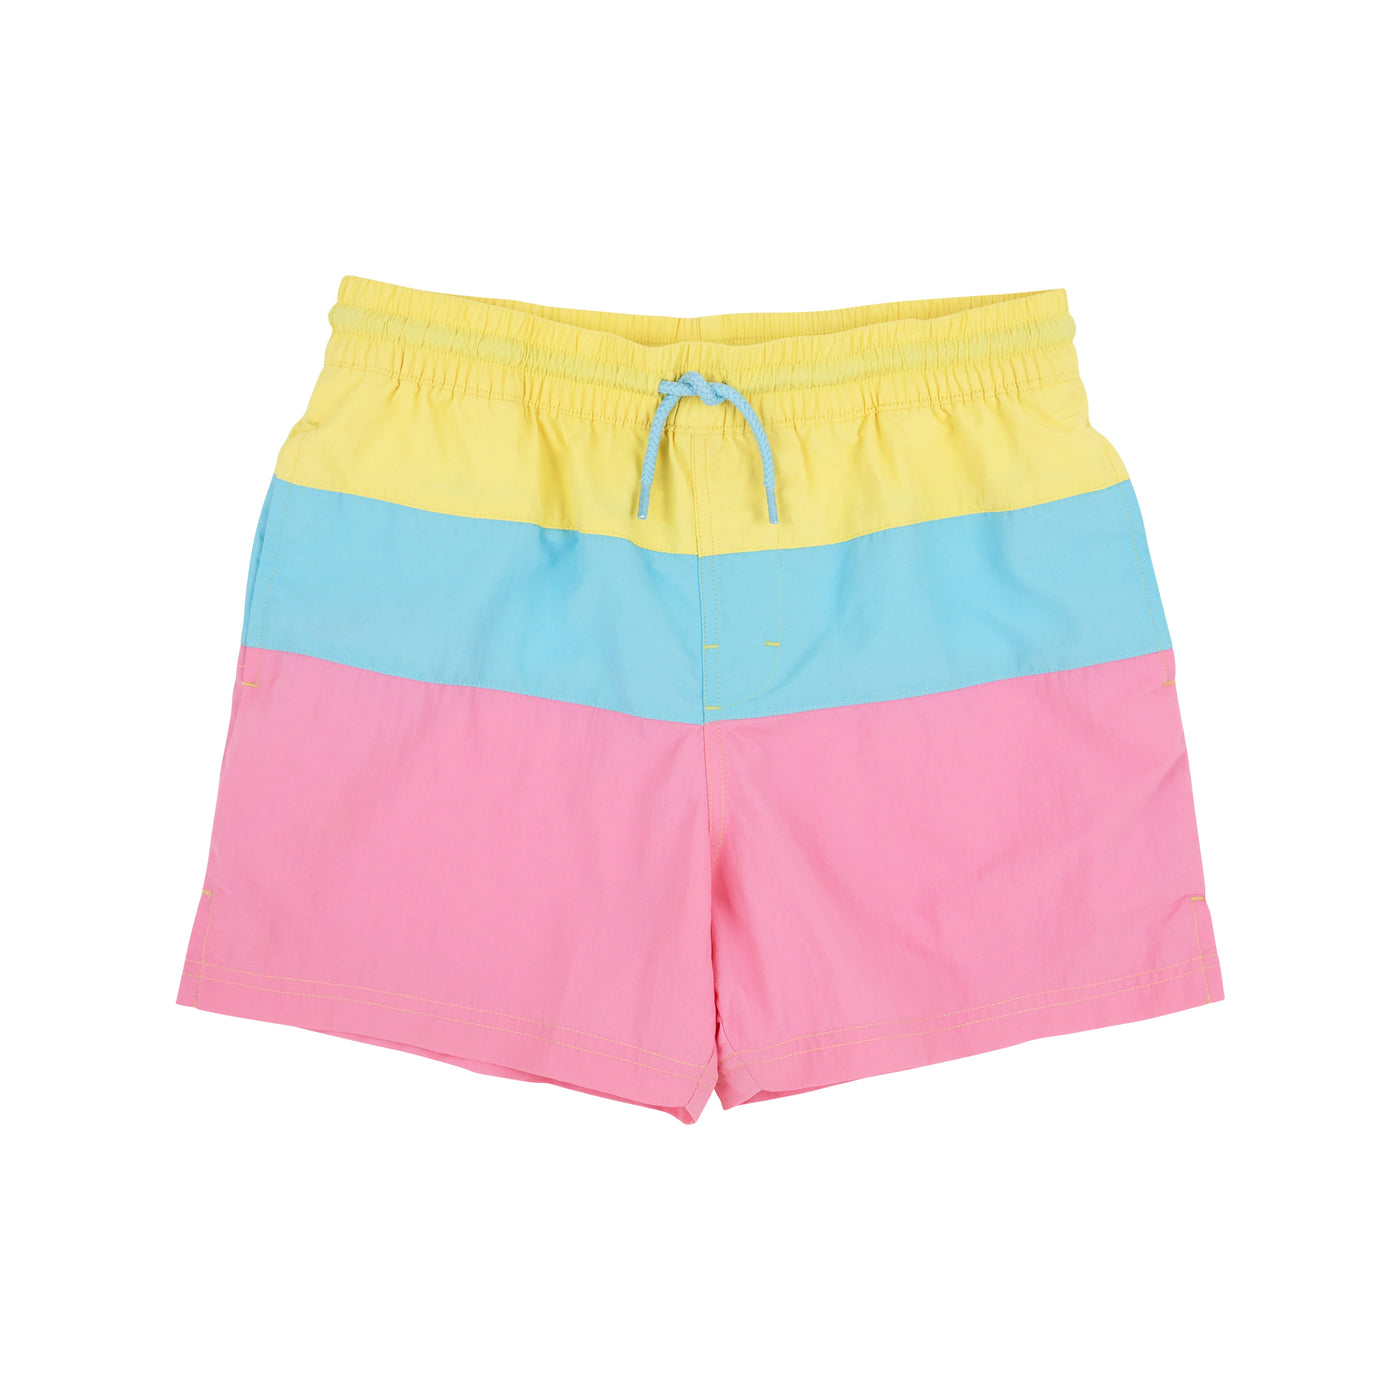 Lake Worth Yellow/Brookline Blue/Hamptons Hot Pink Country Club Colorblock Trunks